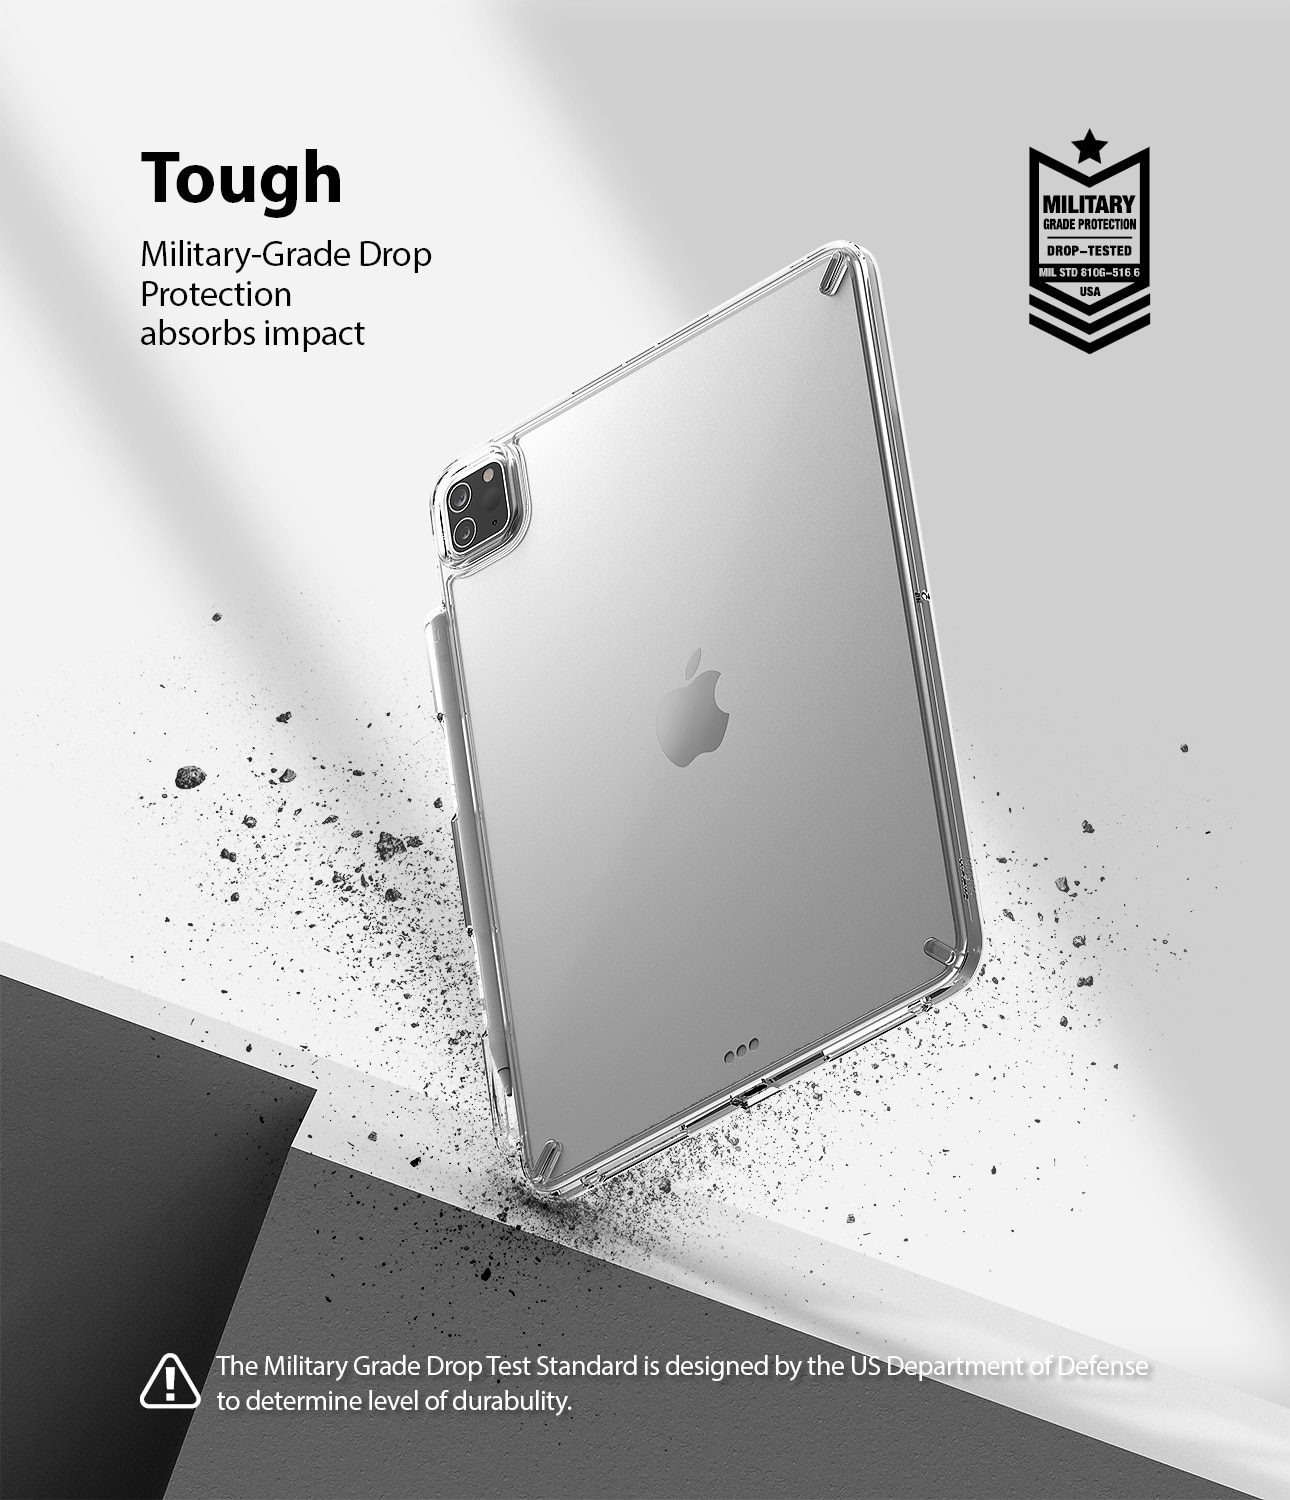 Coque Fusion iPad Pro 11 2nd Gen (2020), Clear